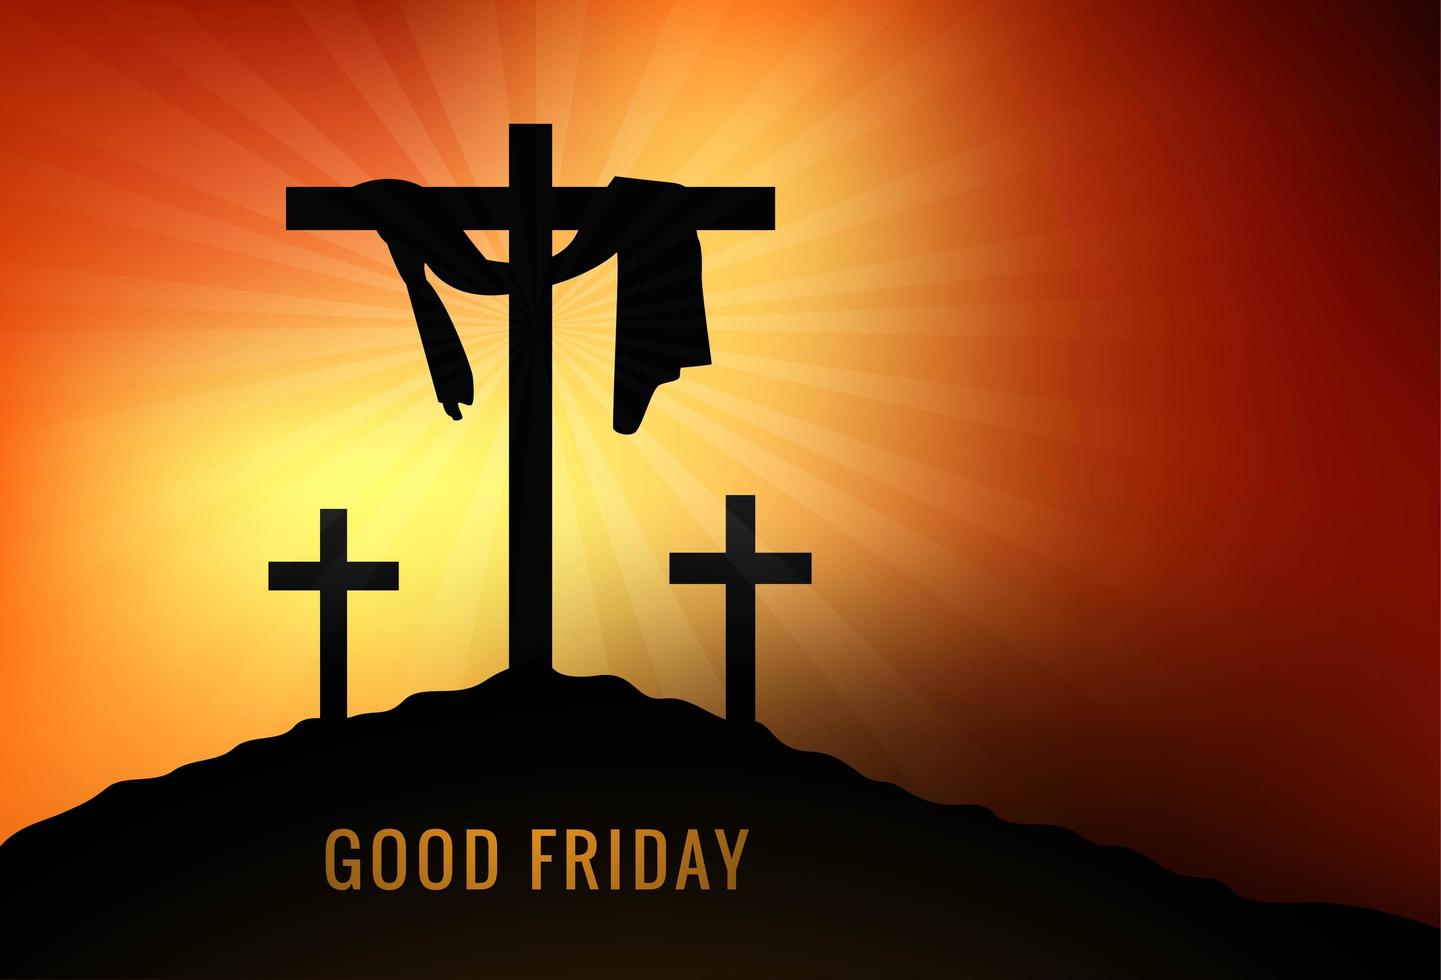 Good Friday with Crosses and Orange Sun Rays vector